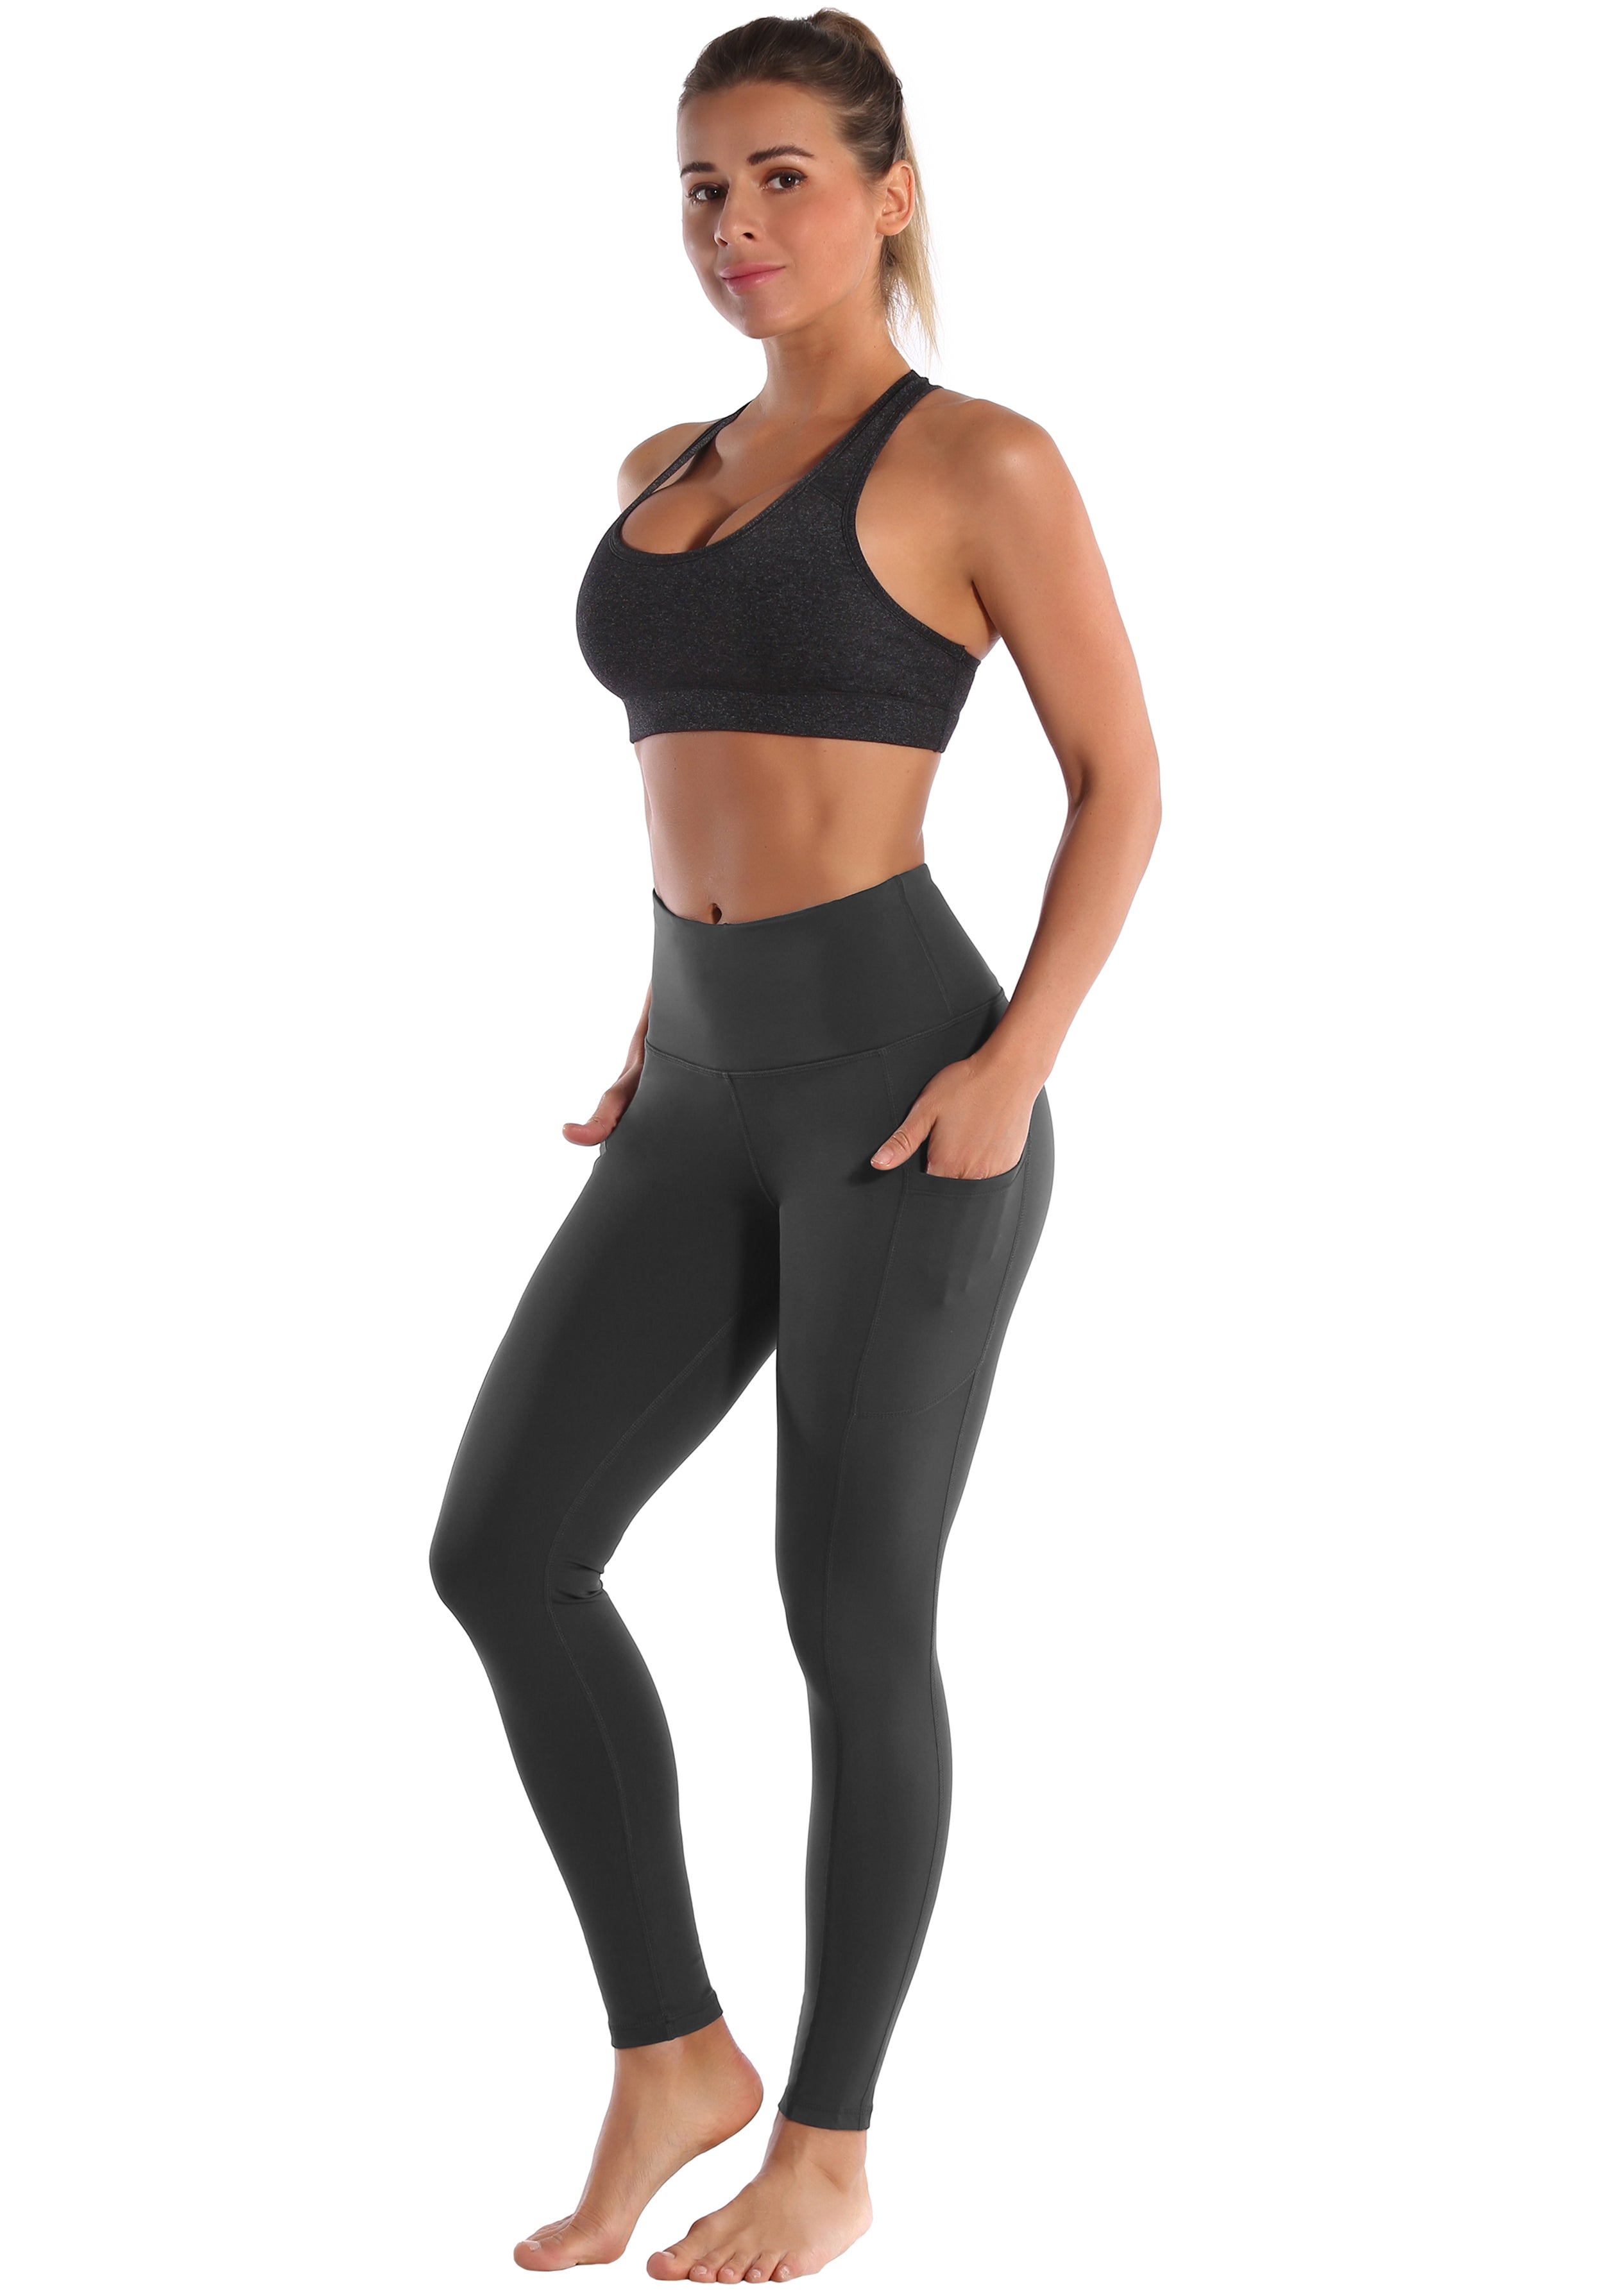 Hip Line Side Pockets Yoga Pants shadowcharcoal Sexy Hip Line Side Pockets 75%Nylon/25%Spandex Fabric doesn't attract lint easily 4-way stretch No see-through Moisture-wicking Tummy control Inner pocket Two lengths